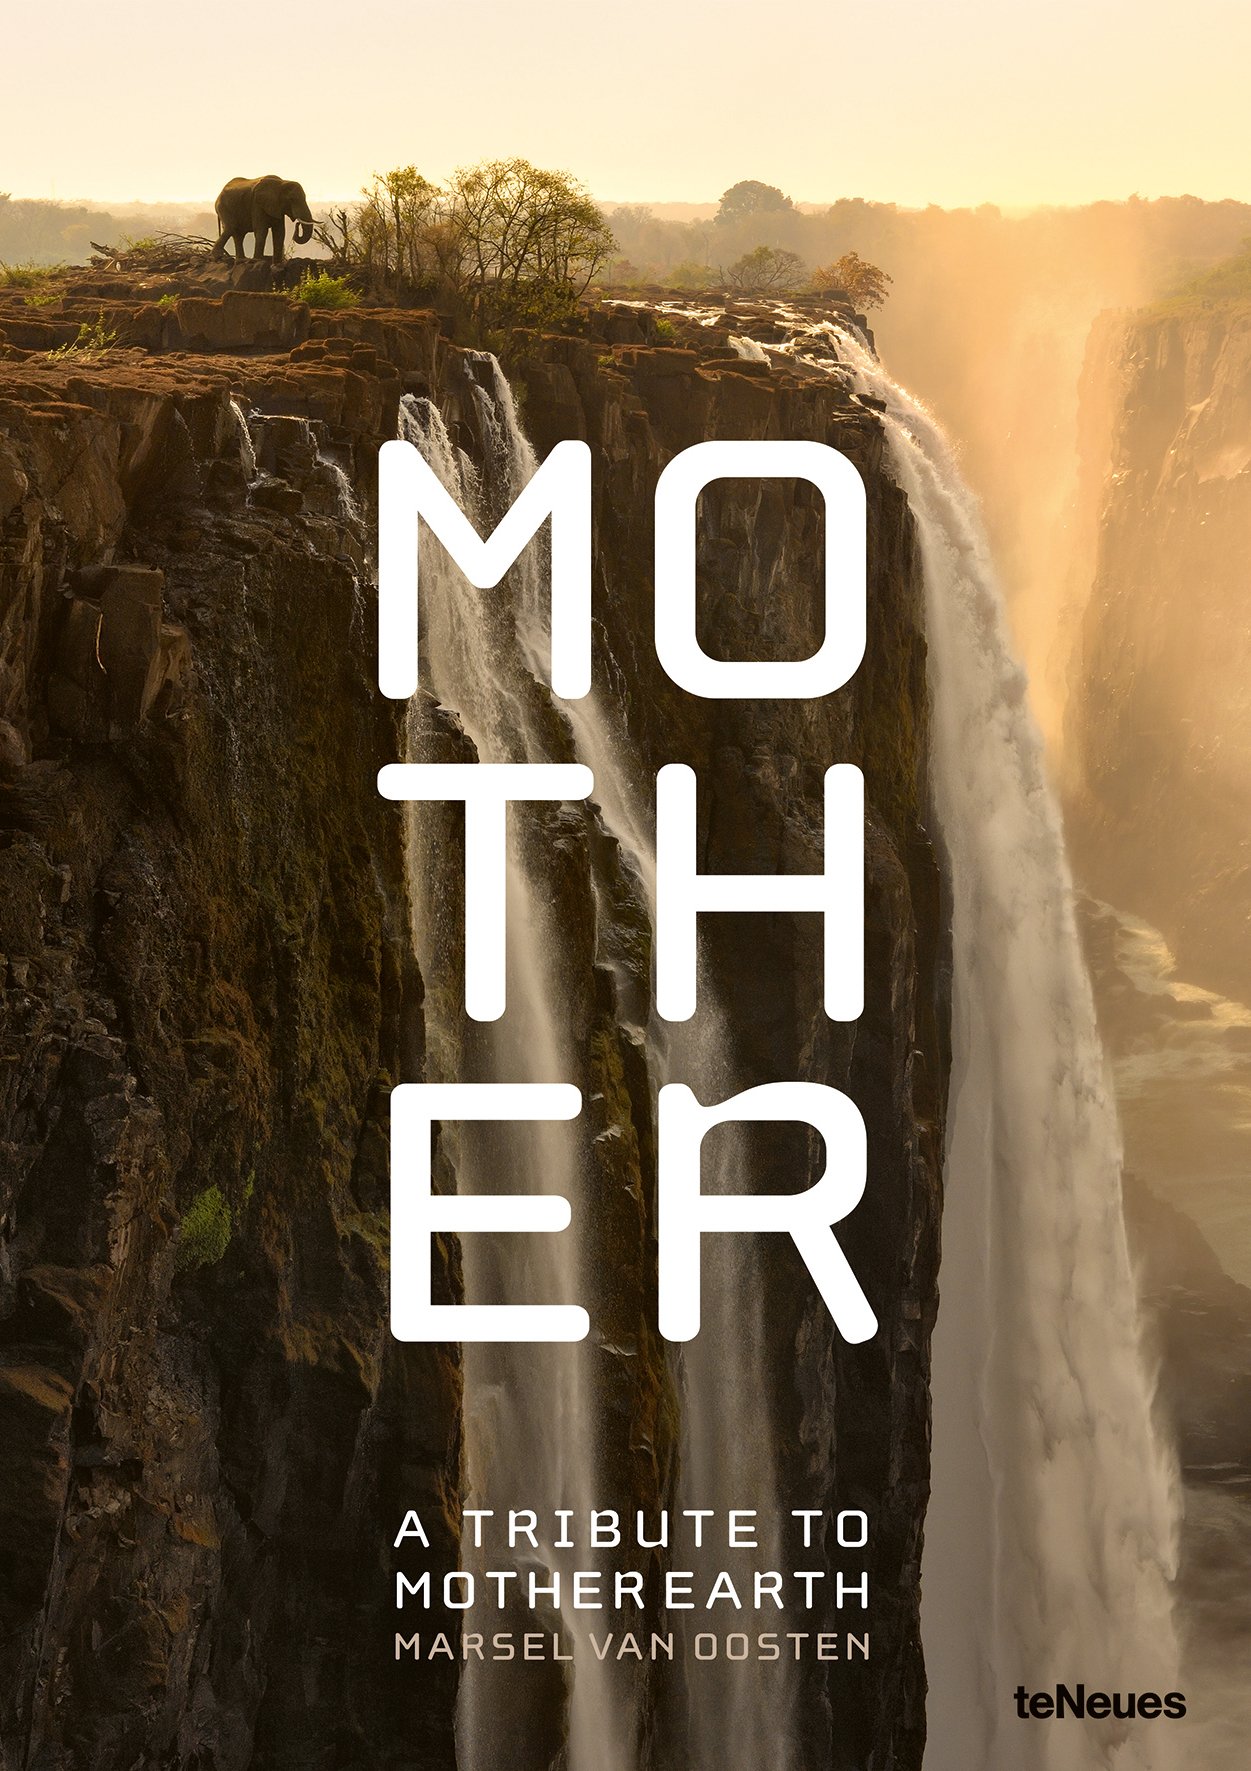 Mother: A Tribute to Mother Earth (teNeues), featured in the Daily Mail, is a visually stunning volume with photographs from around the world.